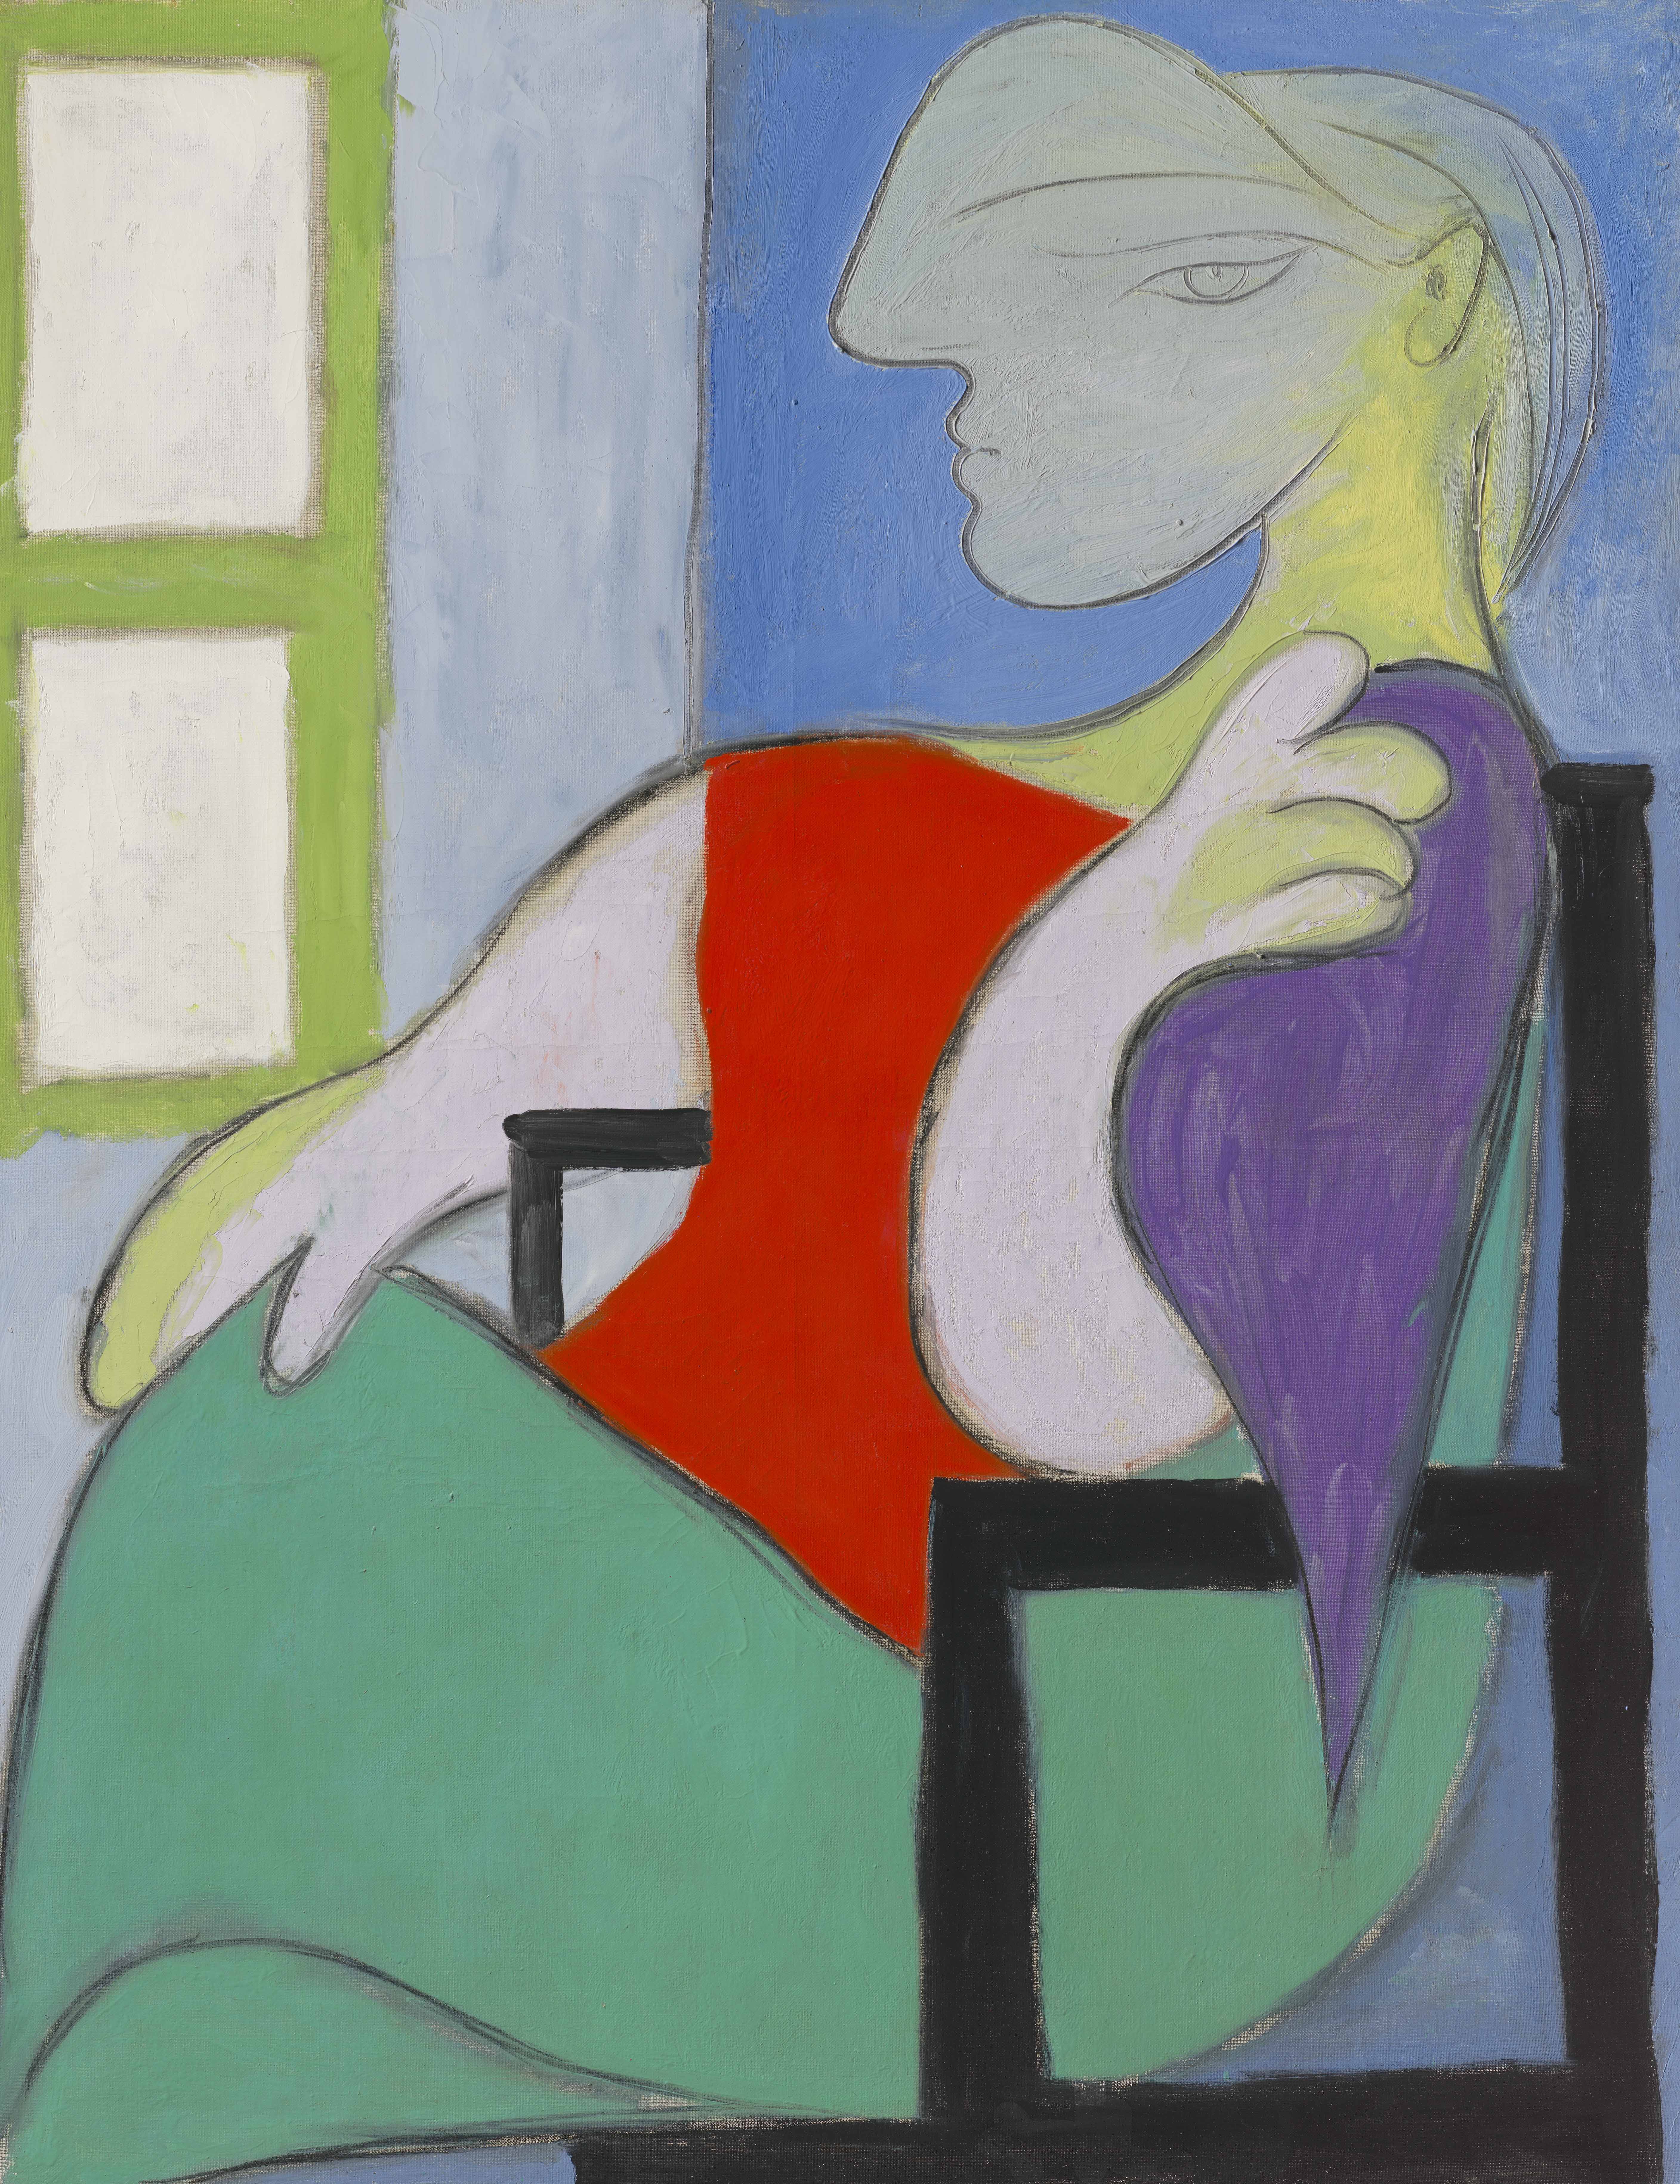 The French exhibits not to miss this fall: Picasso, Rothko, Van Gogh